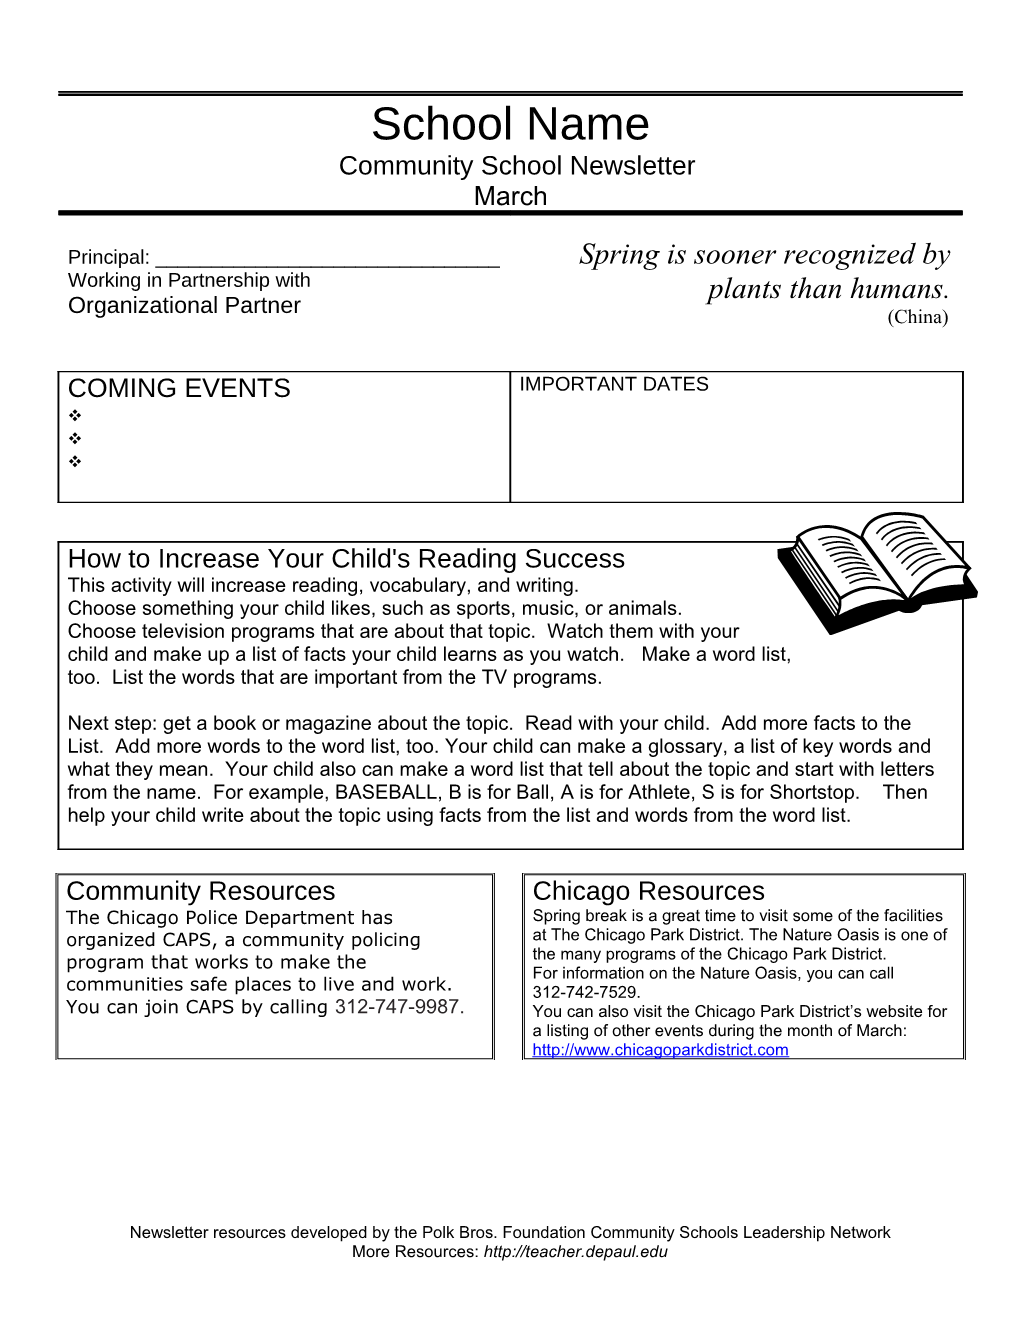 Our Community School Newsletter